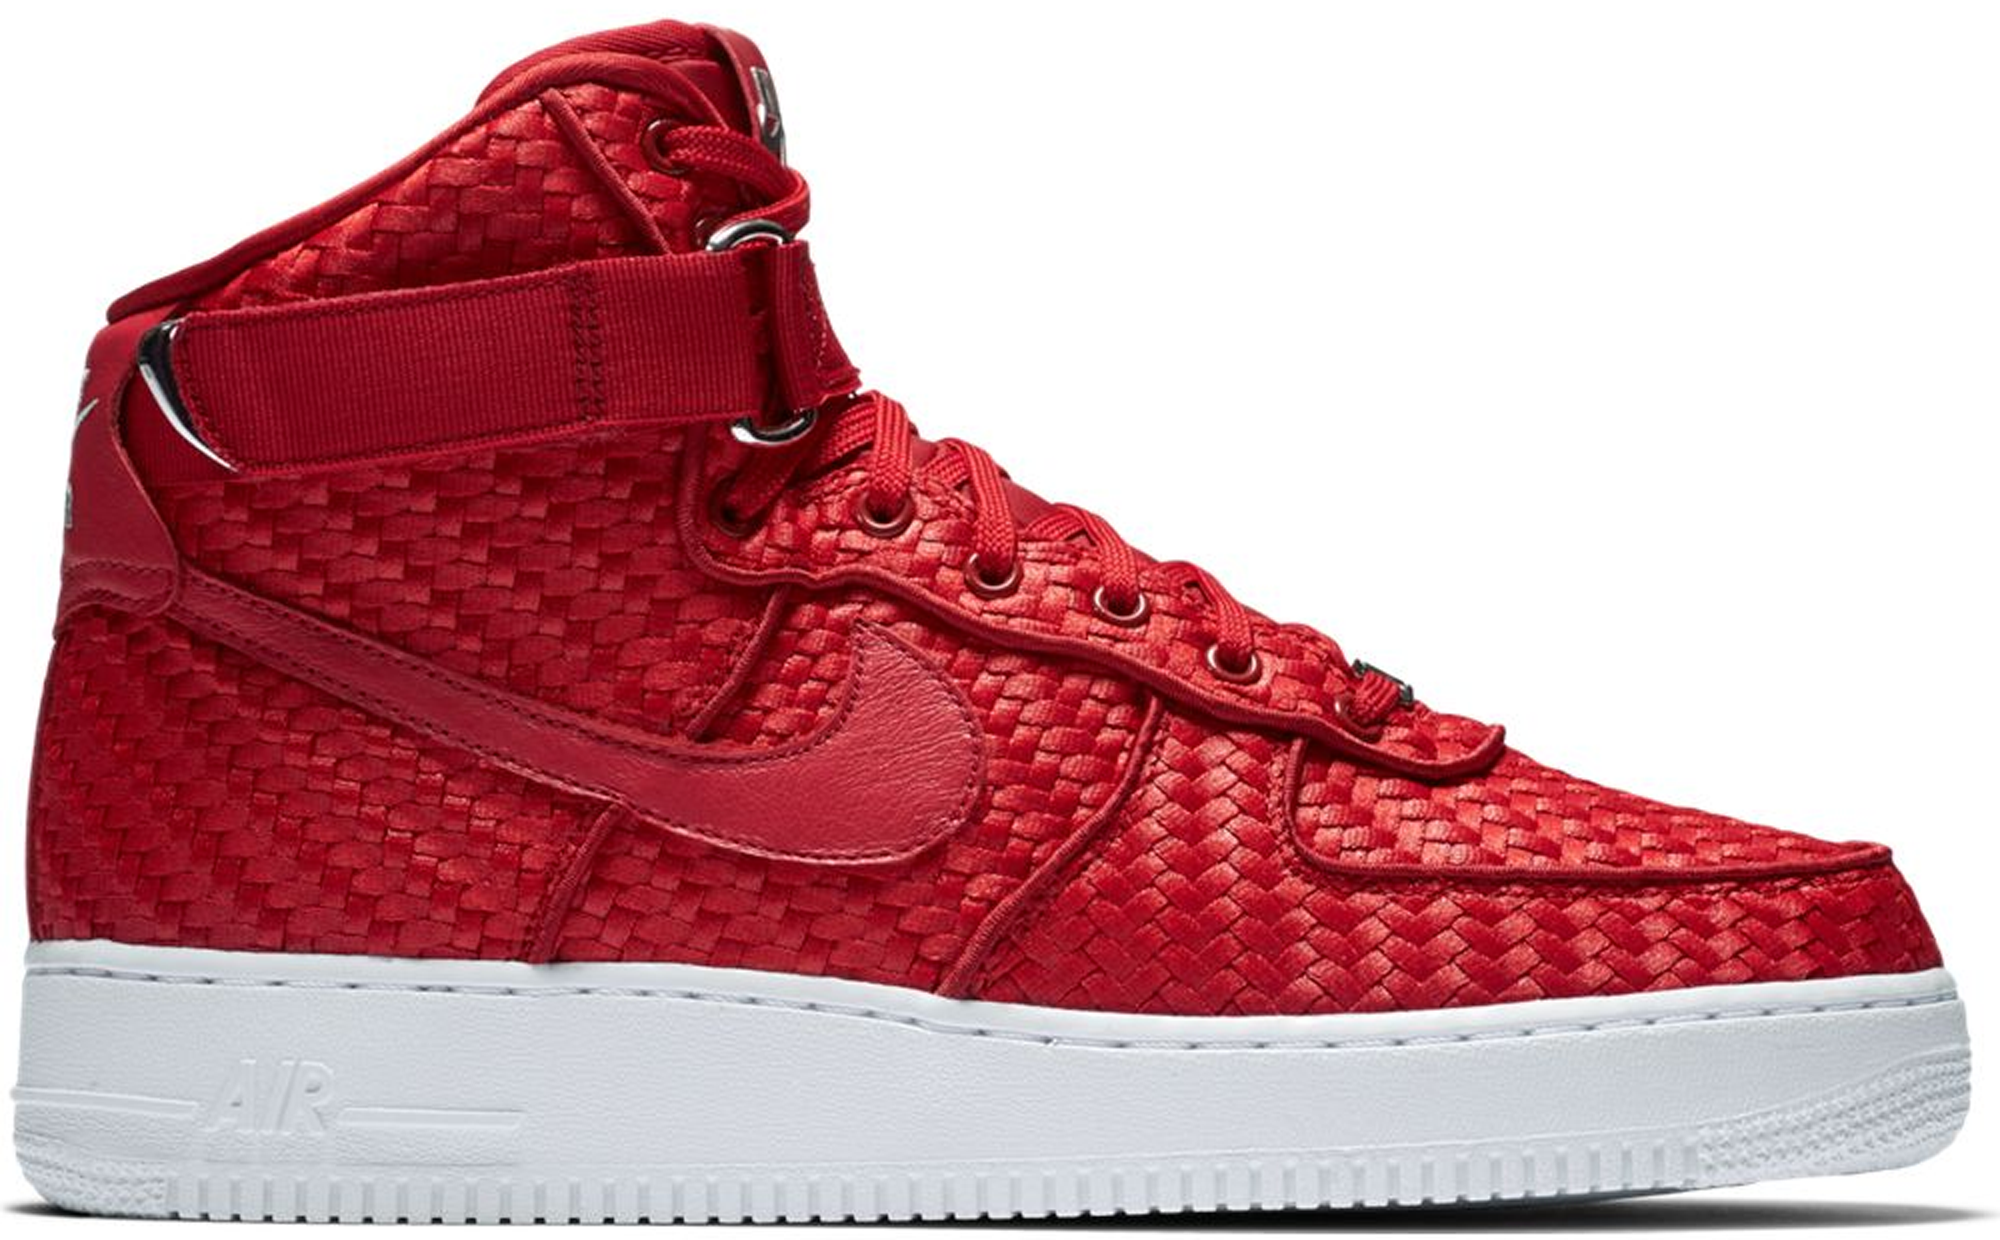 Nike Air Force 1 High Woven Gym Red 